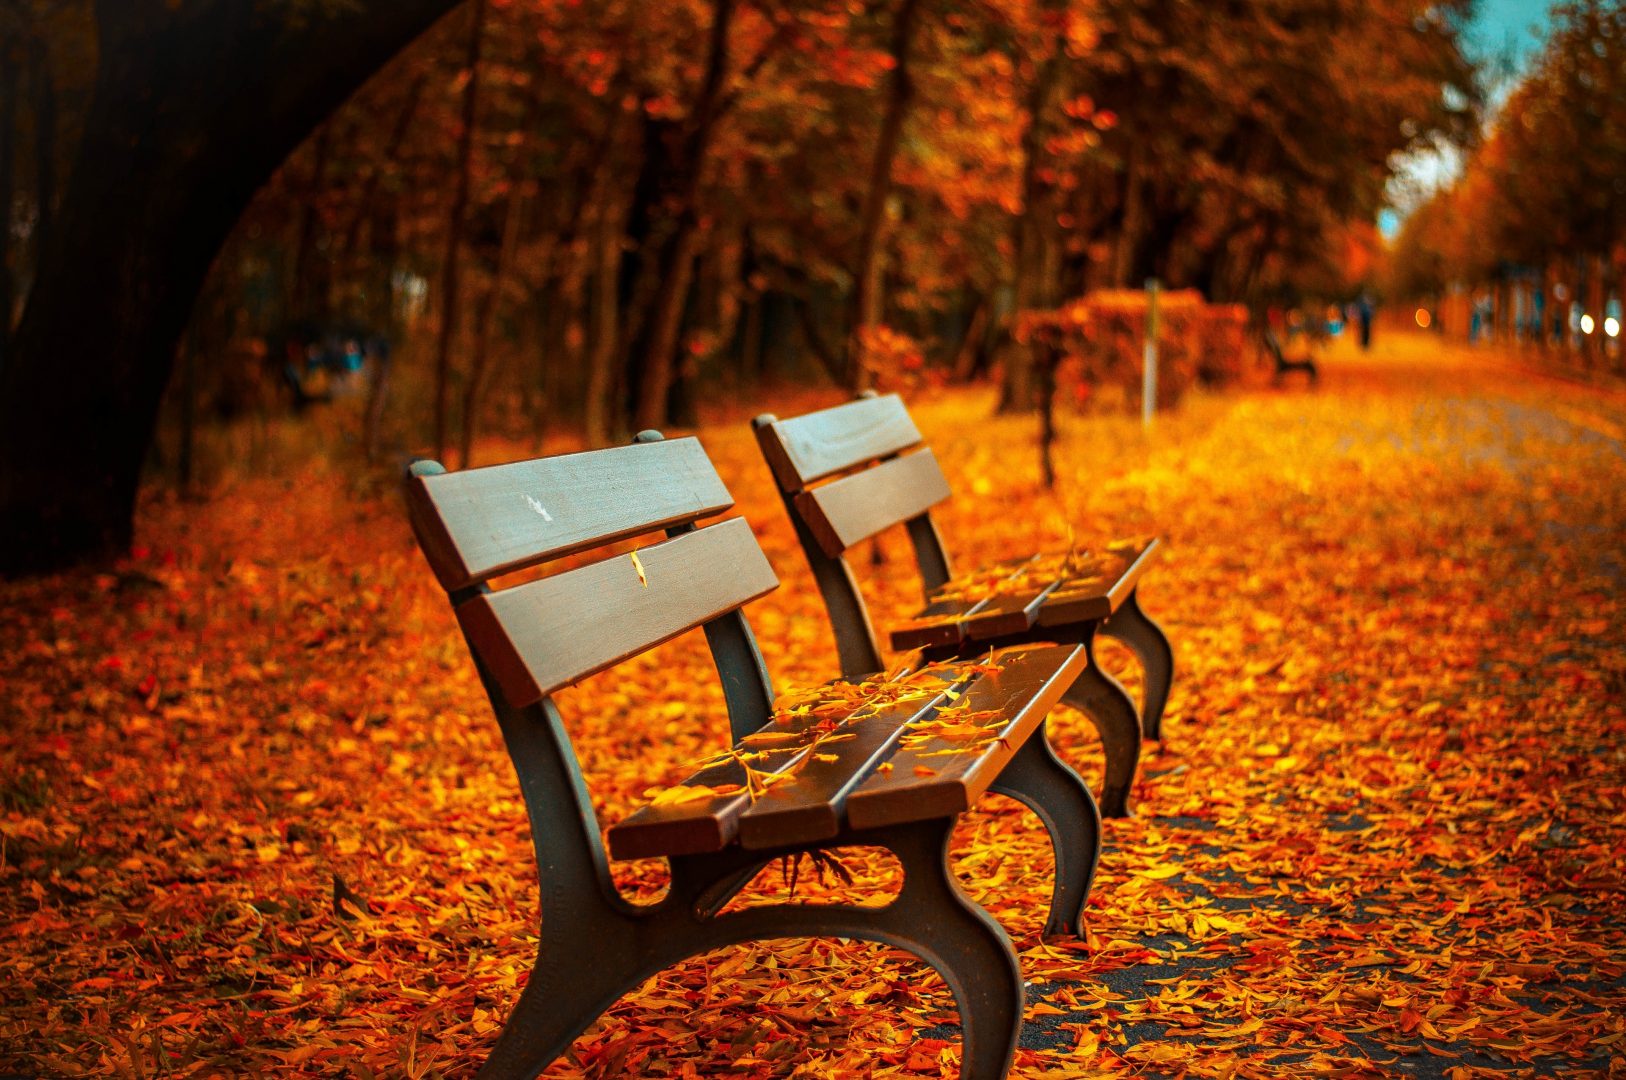 Park benches on the side of a walkway covered in autumn leaves